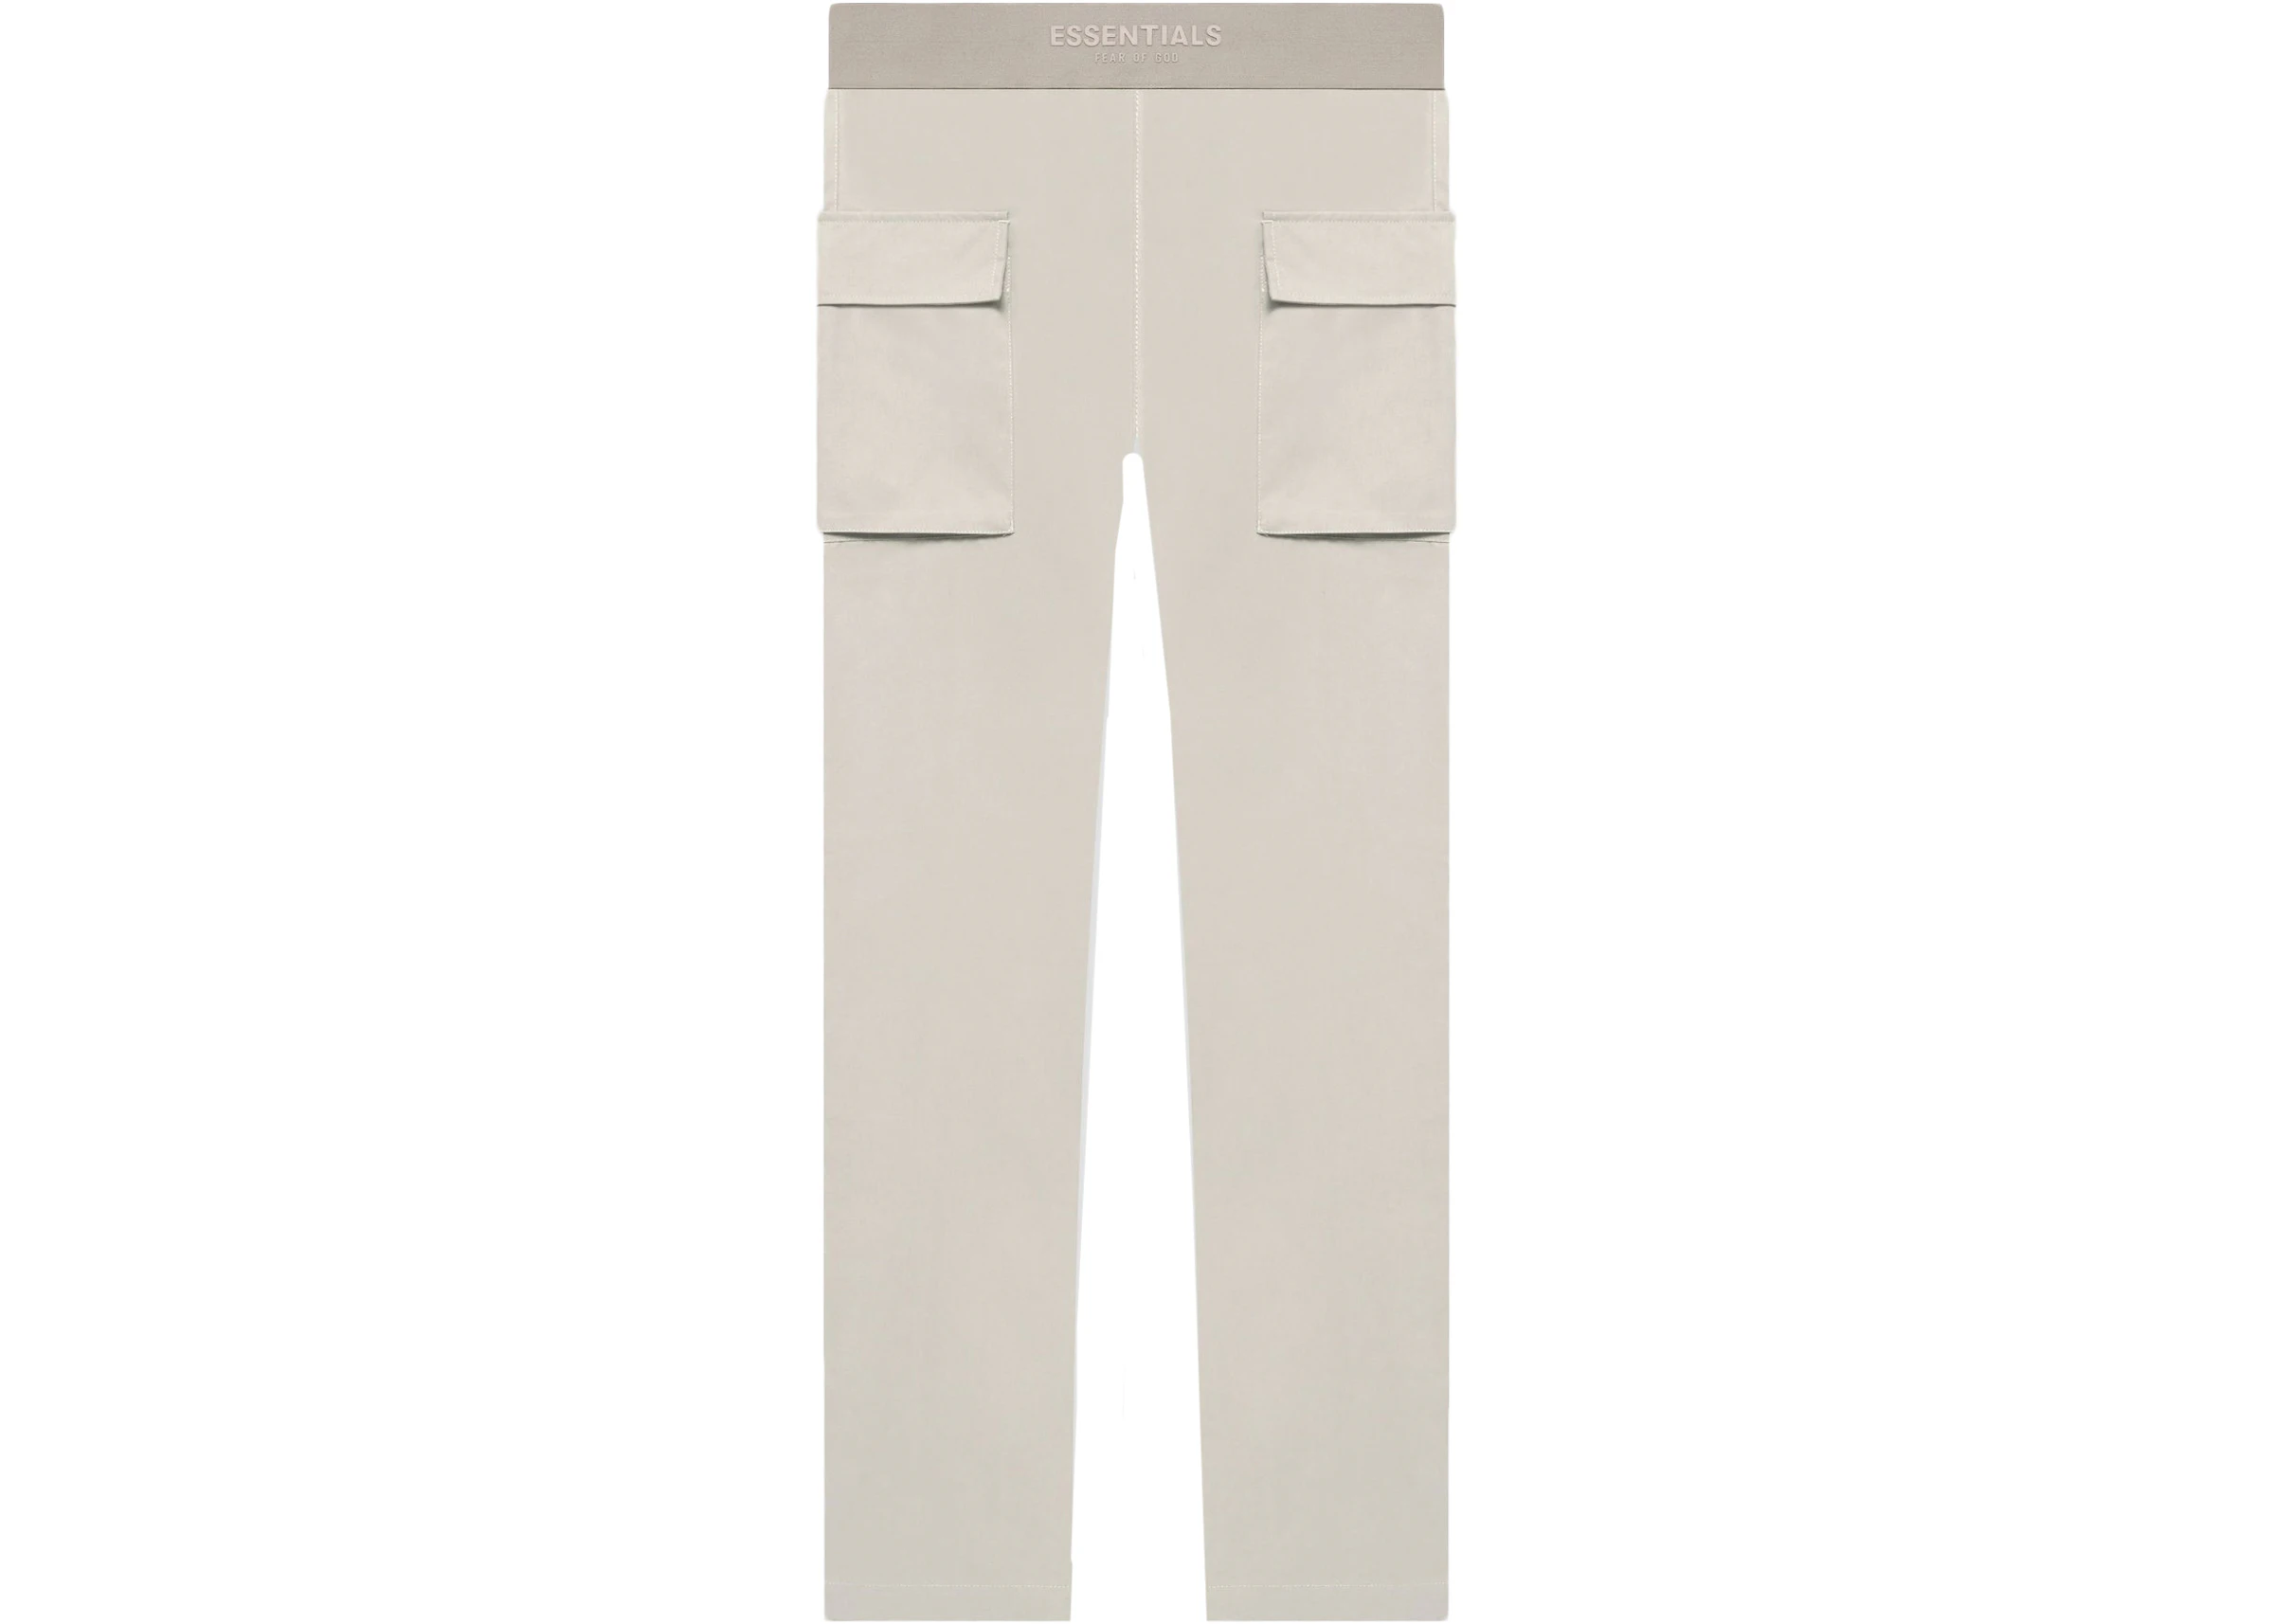 Fear of God Essentials Women's Cargo Pant Wheat - SS22 - US